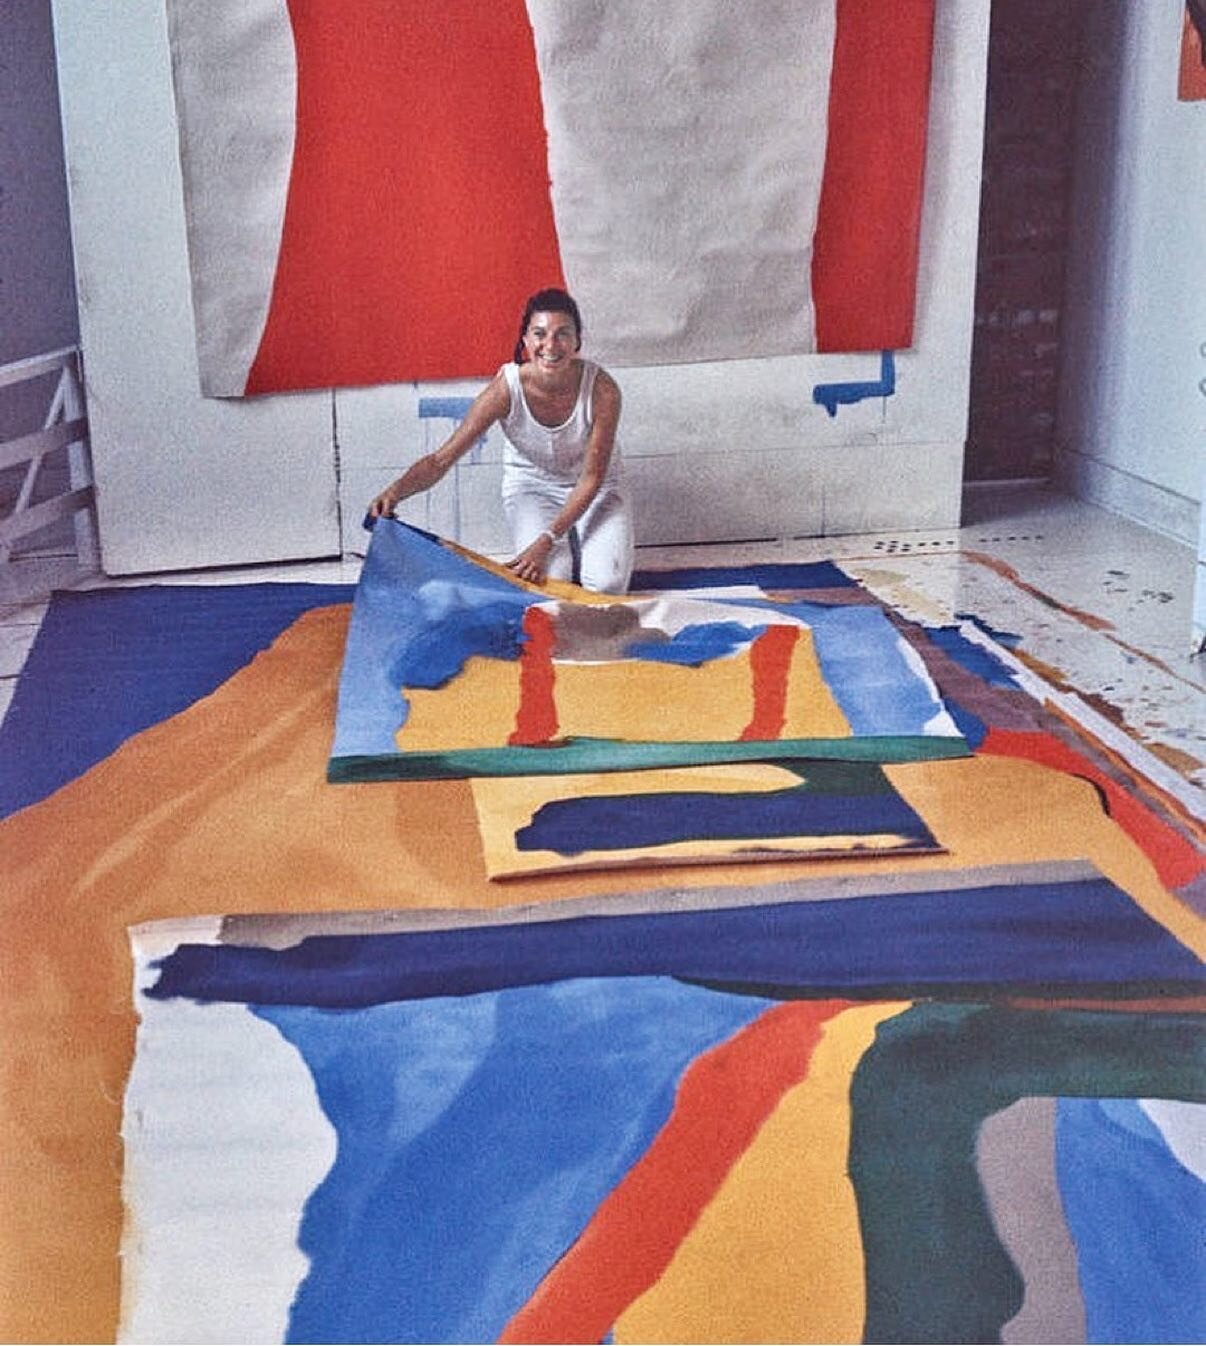 One of our faves... Helen Frankenthaler #helenfrankenthaler
#creativelife #creativecommunity #connect #create #collaborate